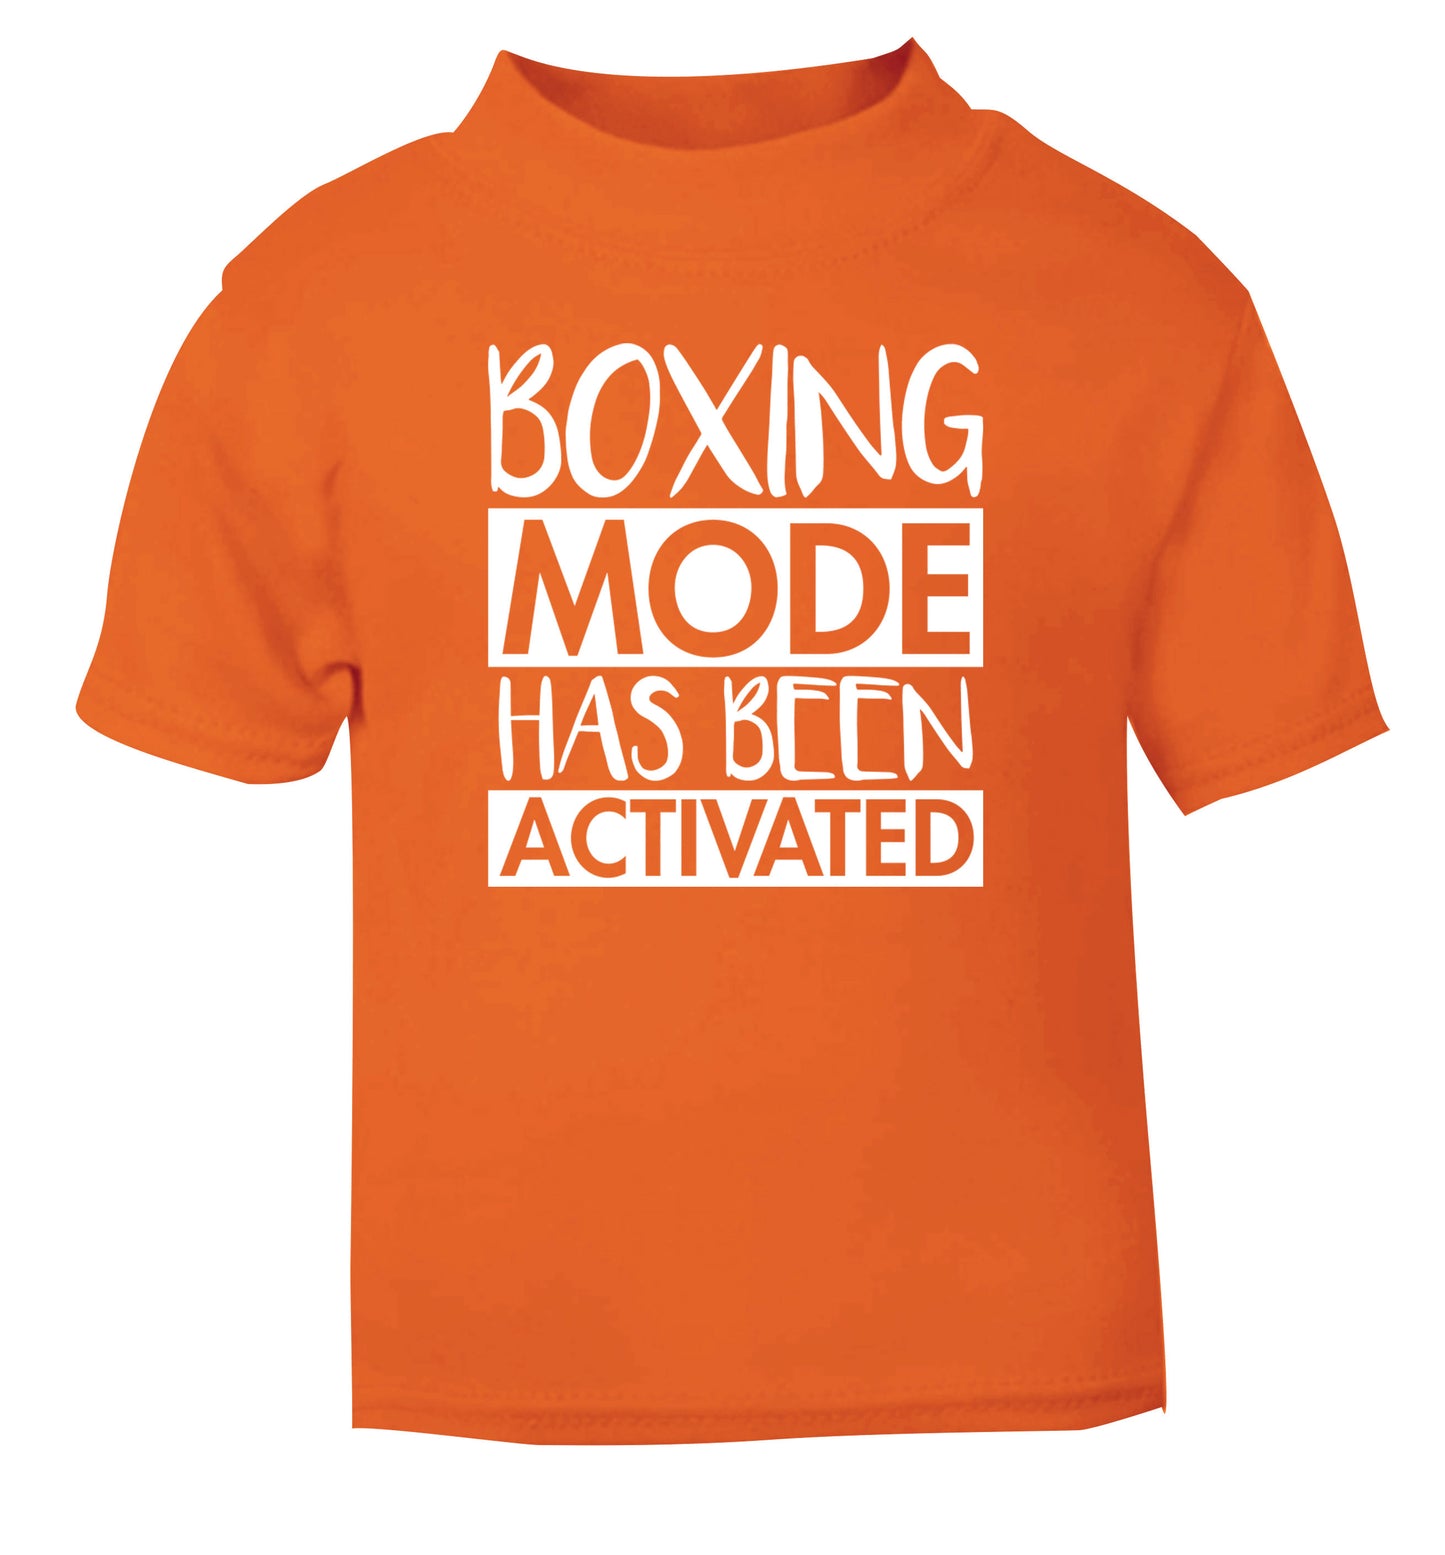 Boxing mode activated orange Baby Toddler Tshirt 2 Years